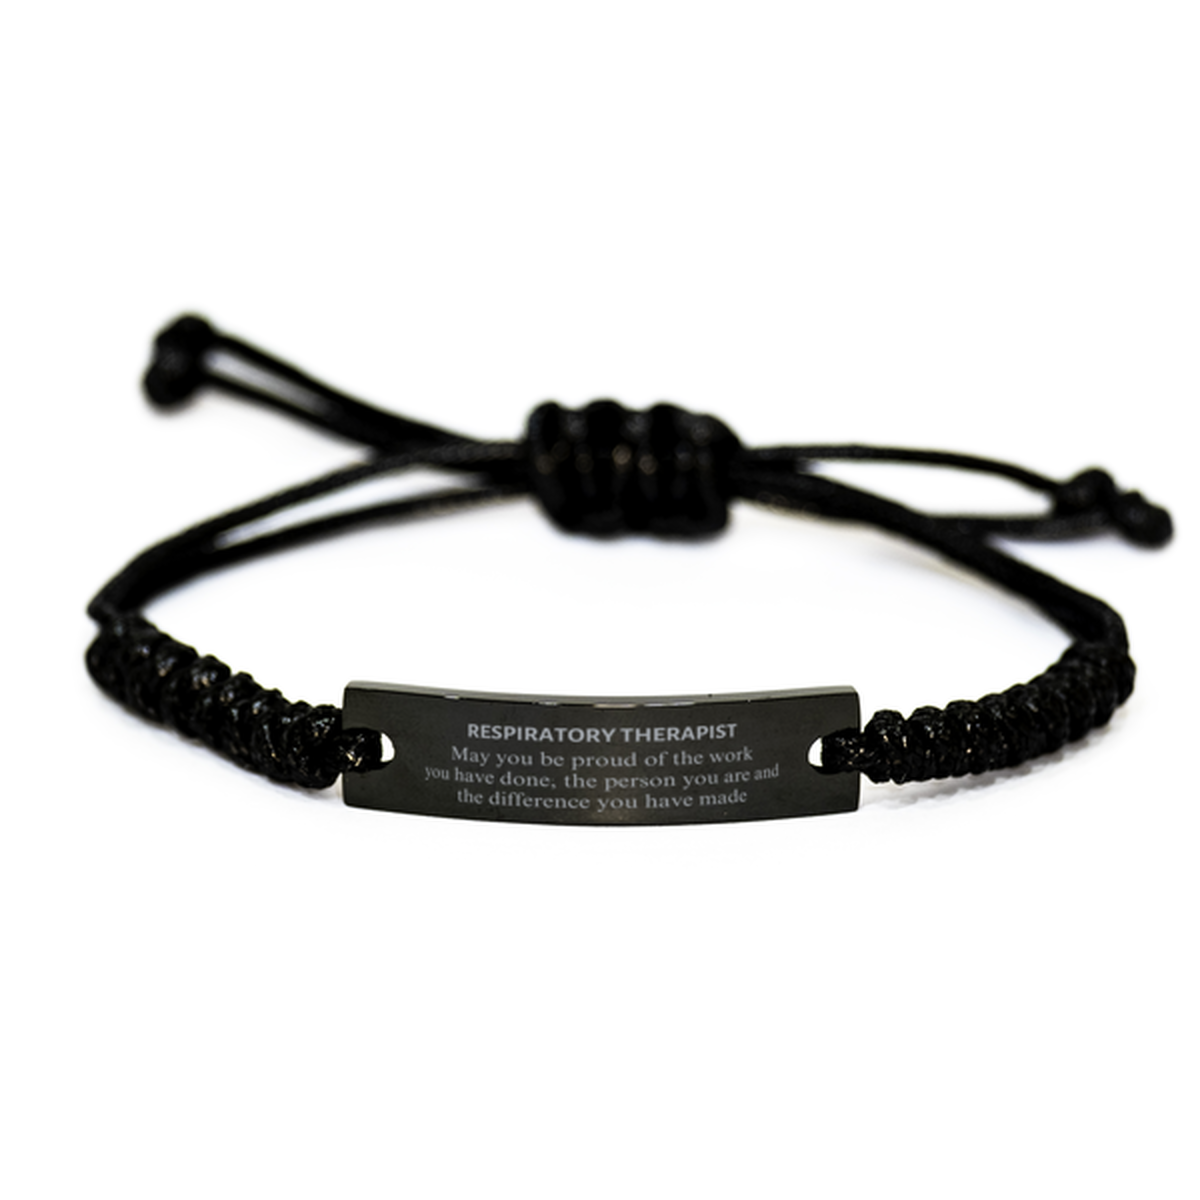 Respiratory Therapist May you be proud of the work you have done, Retirement Respiratory Therapist Black Rope Bracelet for Colleague Appreciation Gifts Amazing for Respiratory Therapist